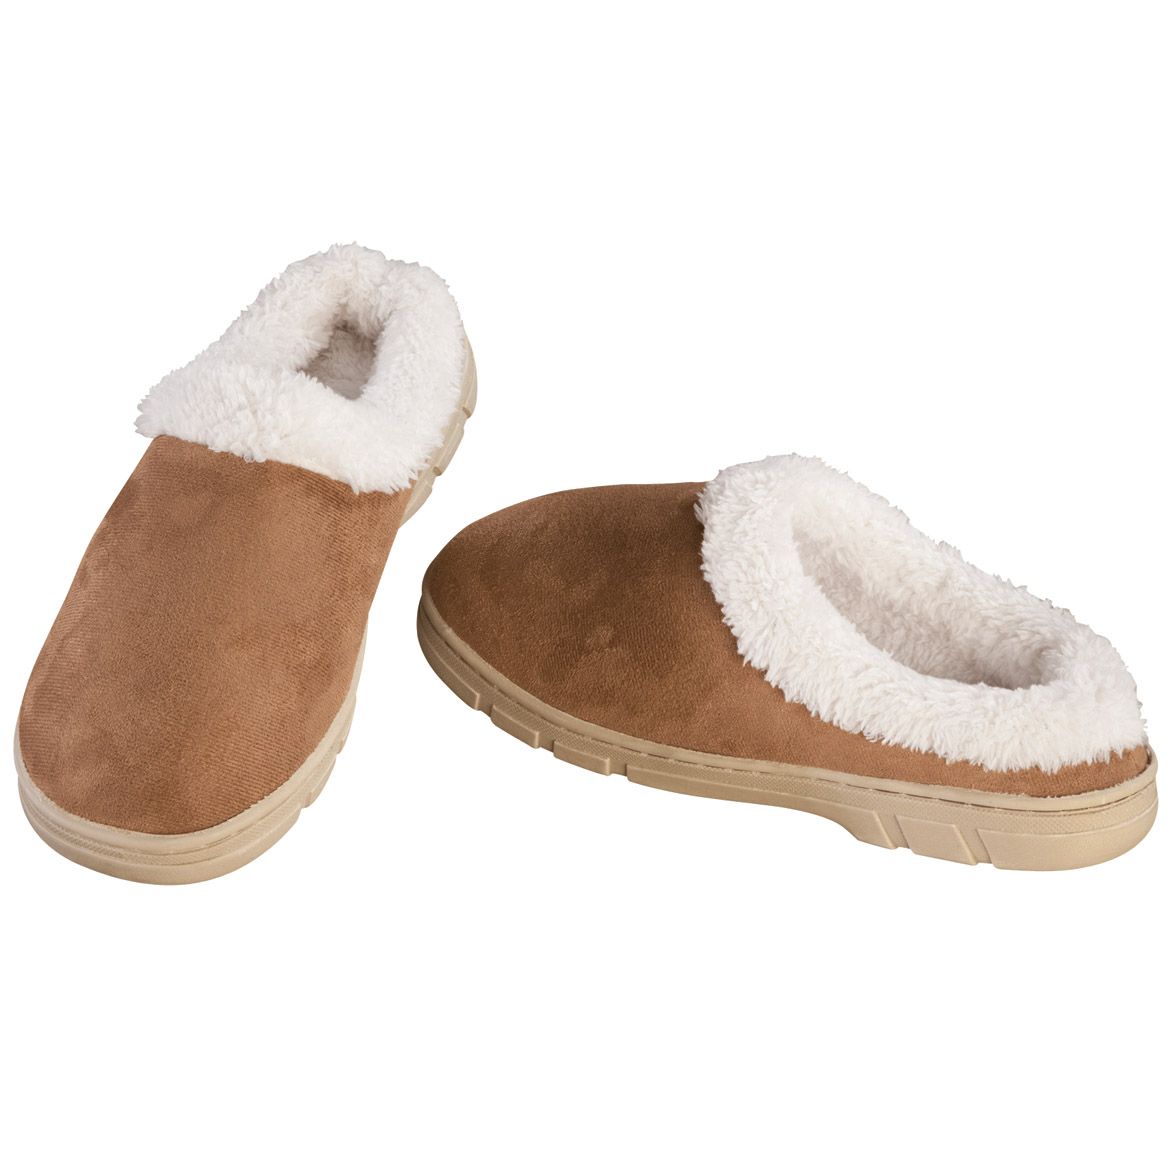 Cape Cod Slippers + '-' + 311572